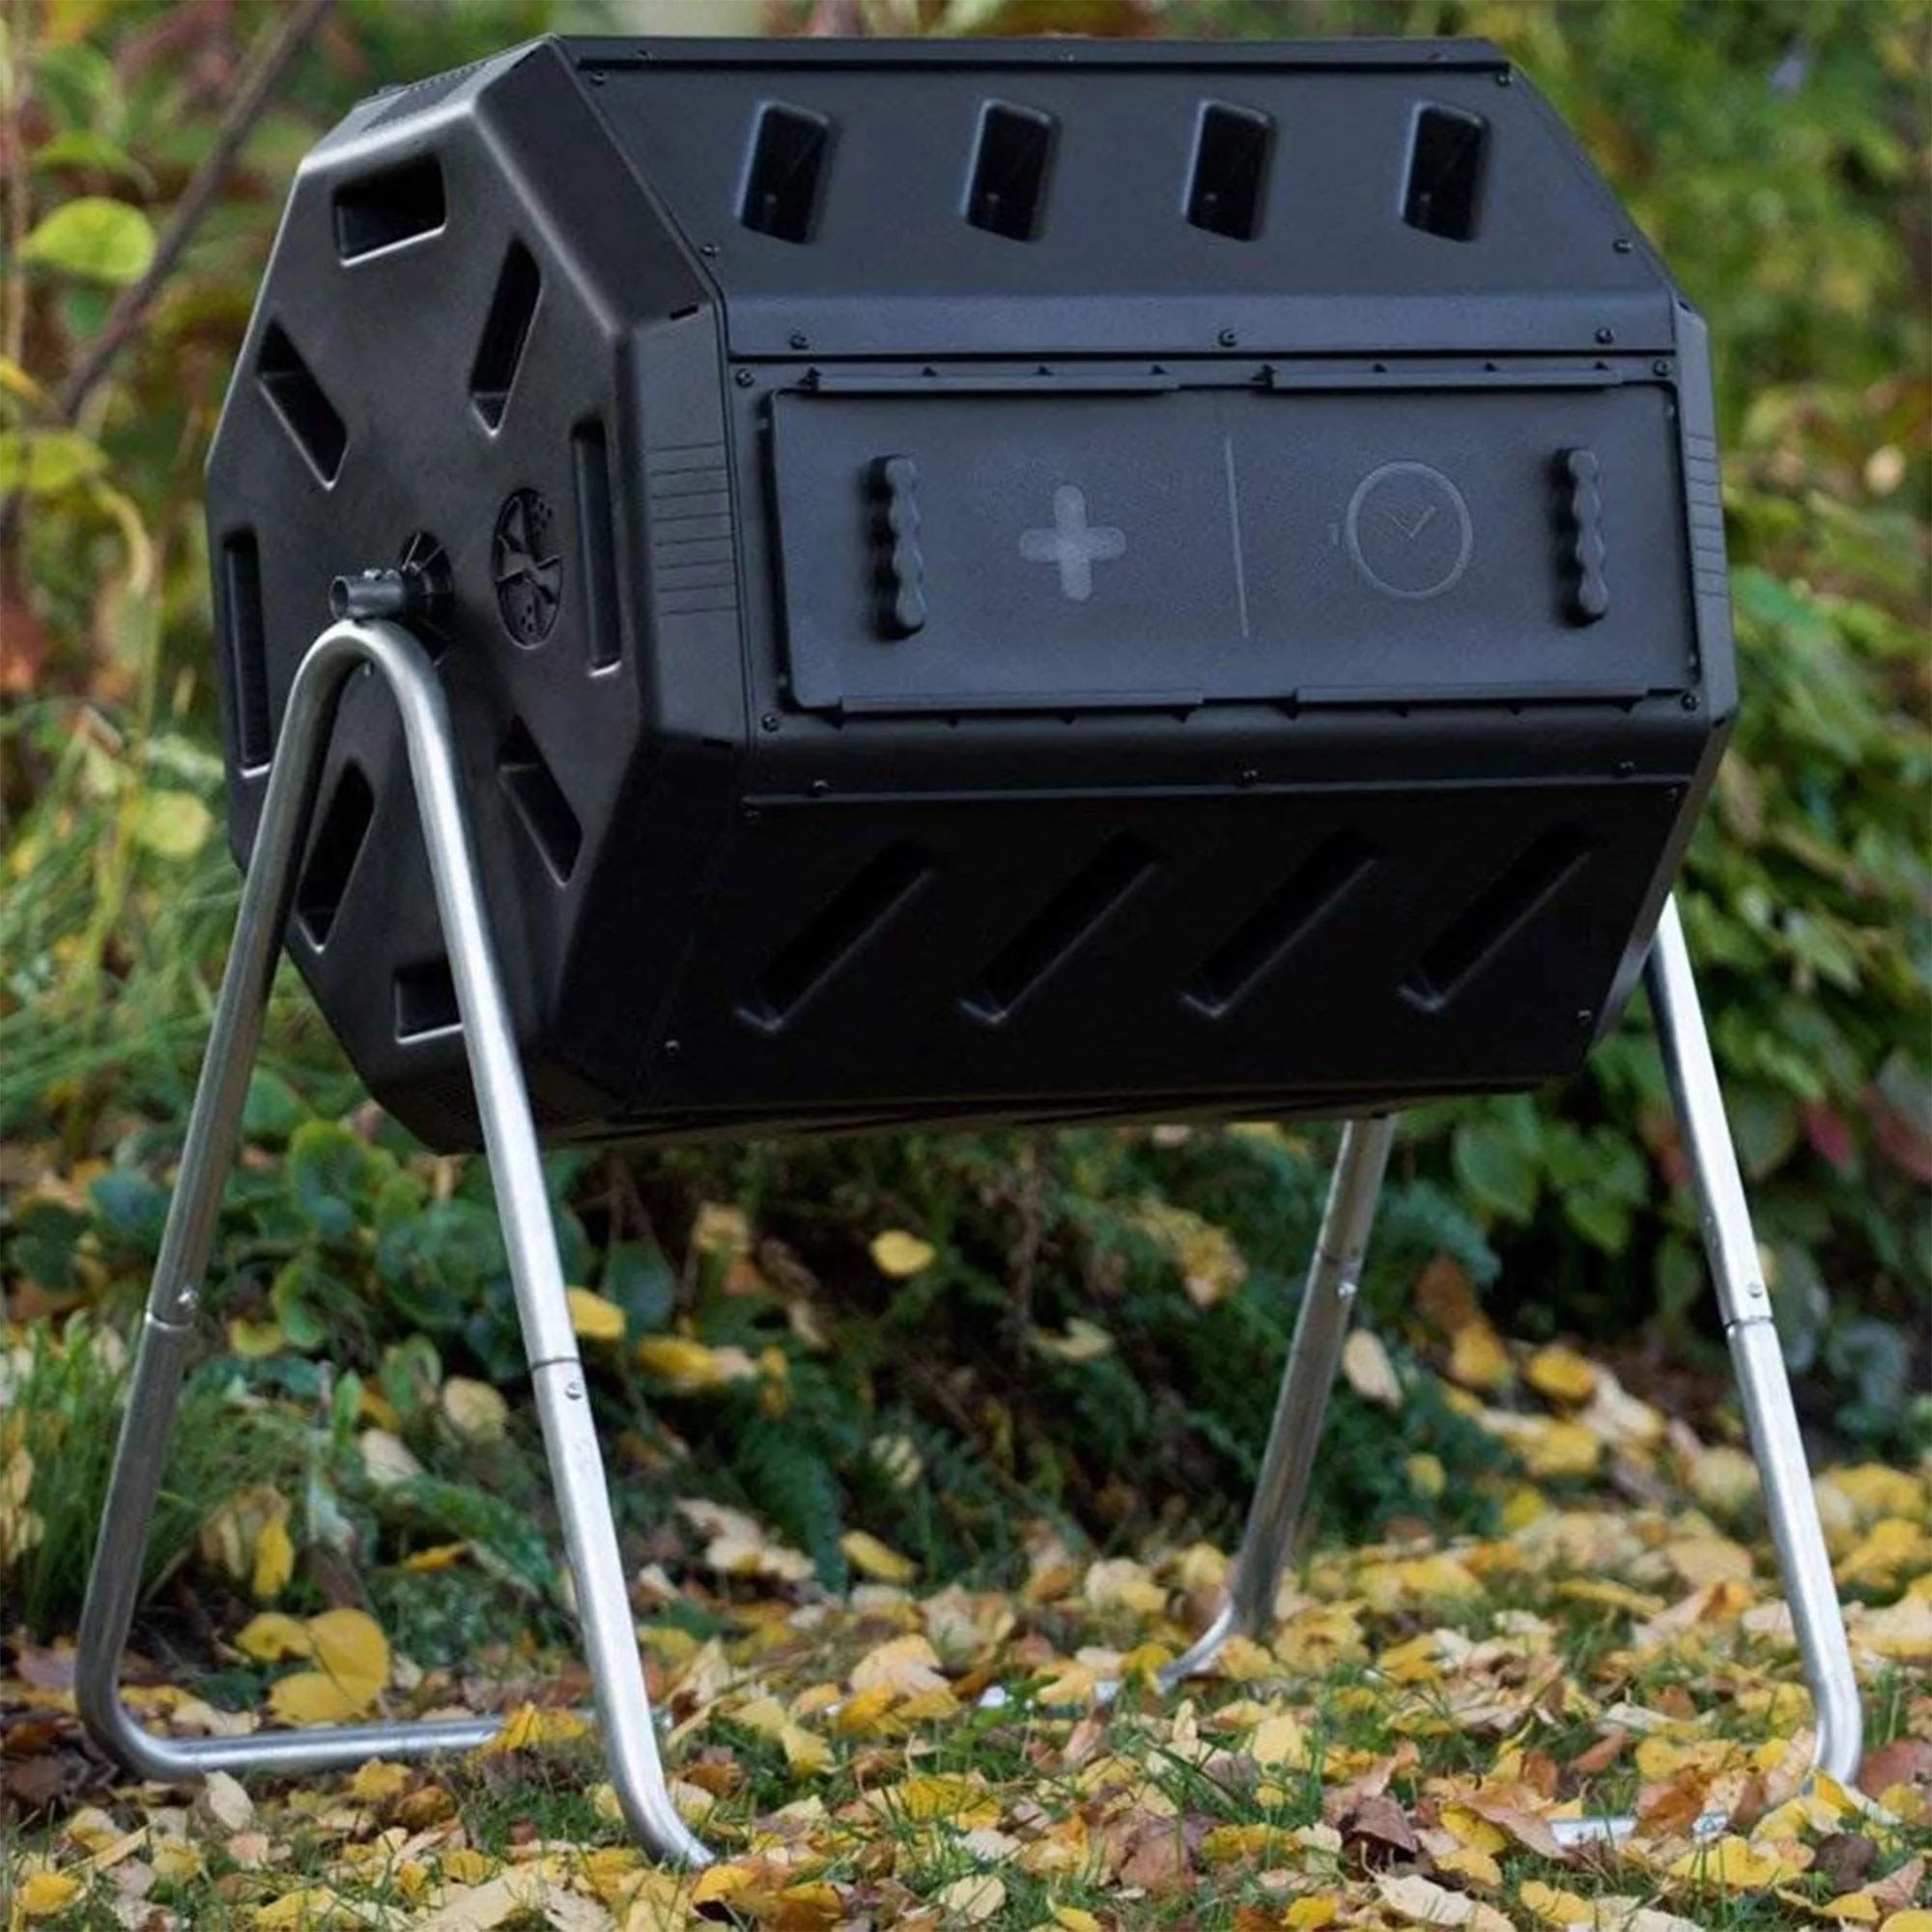 The eight-sided composting bin supported by a steel frame